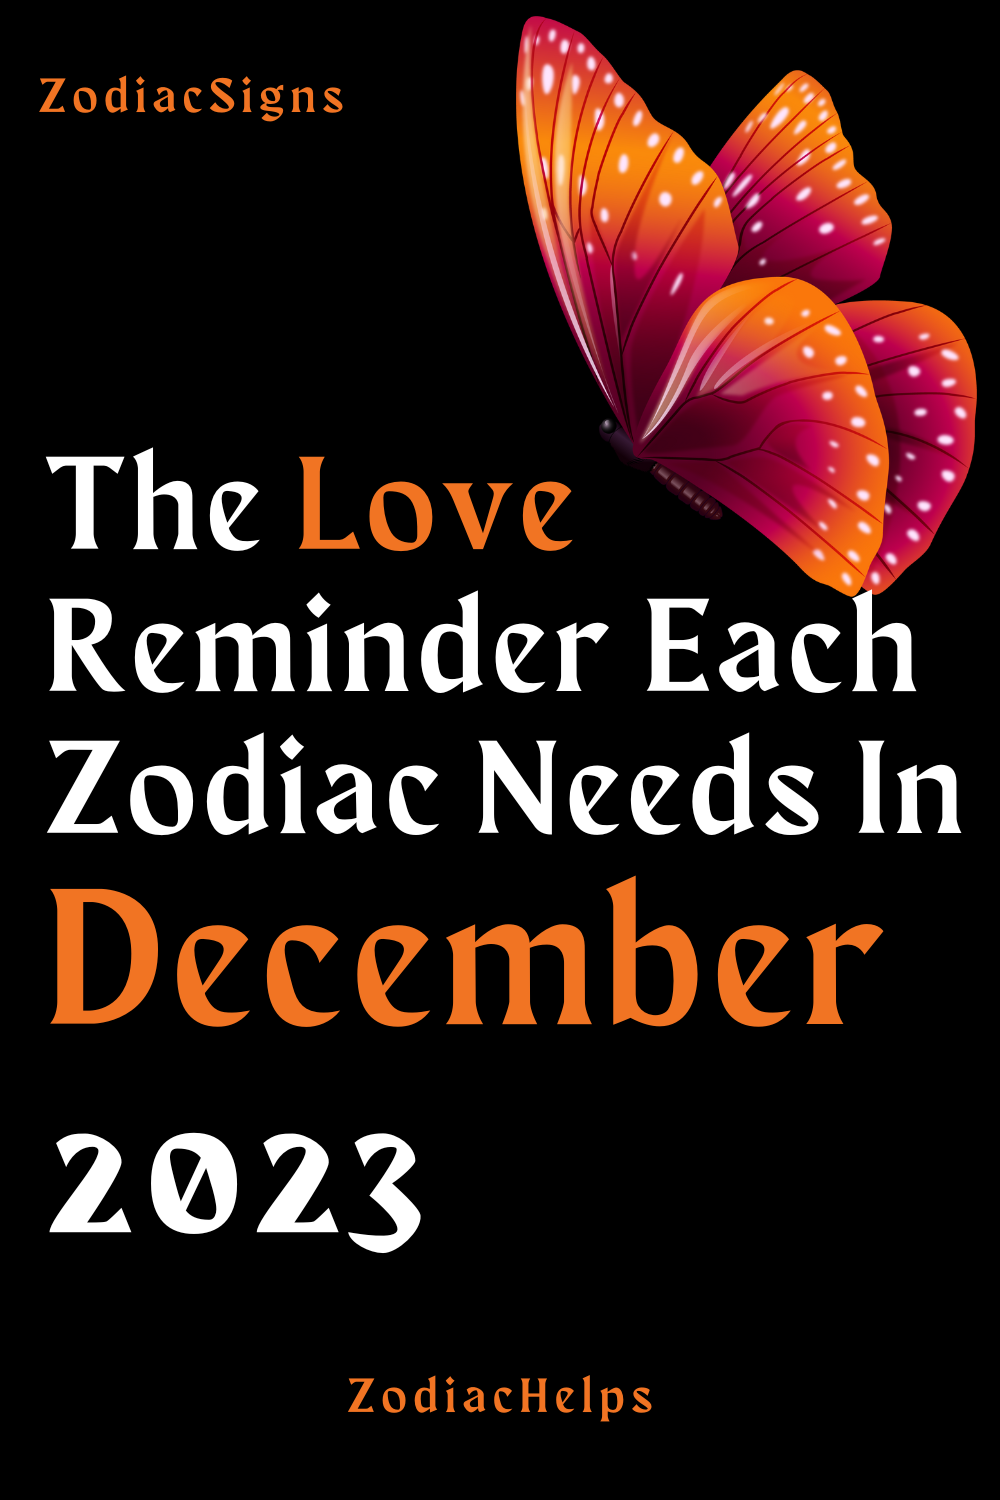 The Love Reminder Each Zodiac Needs In December 2023